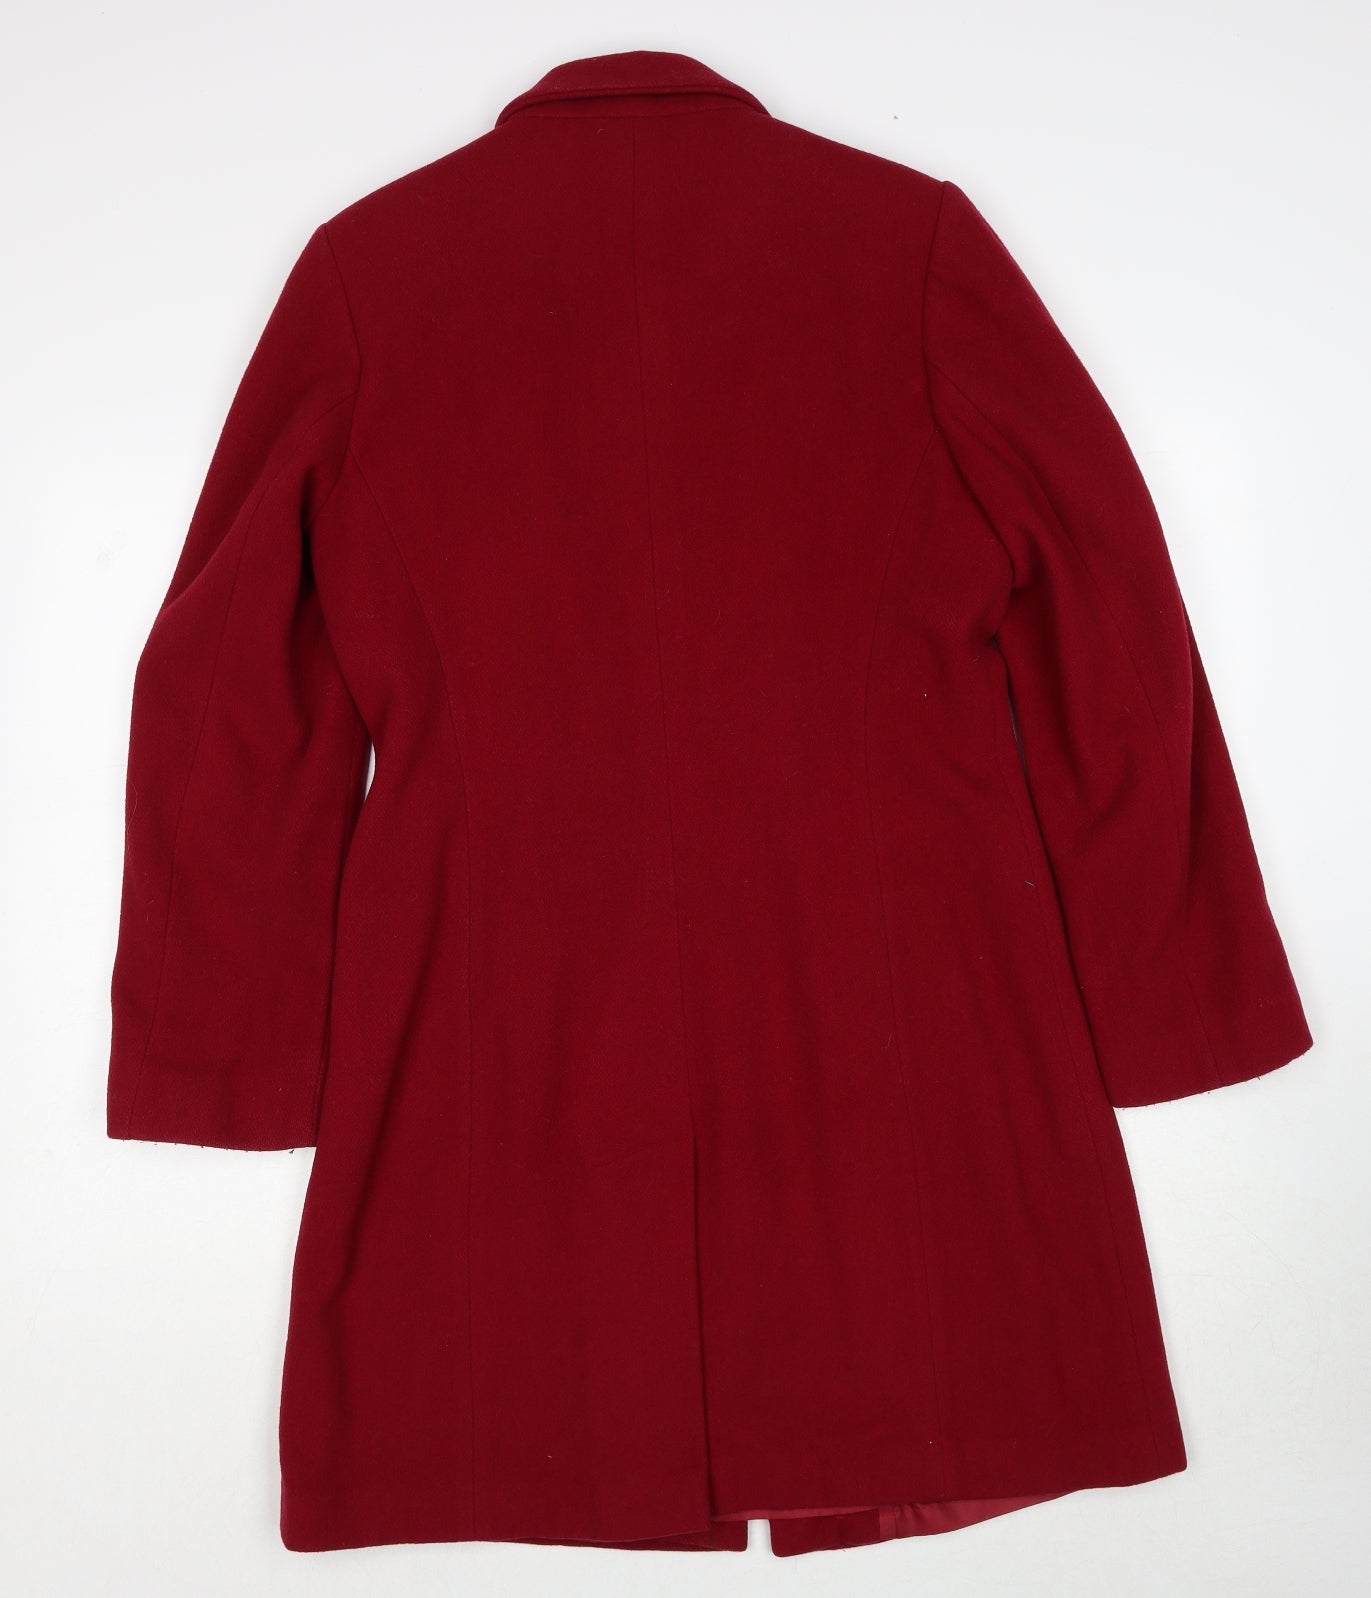 Berghaus Womens Red Overcoat Coat Size 10 Button